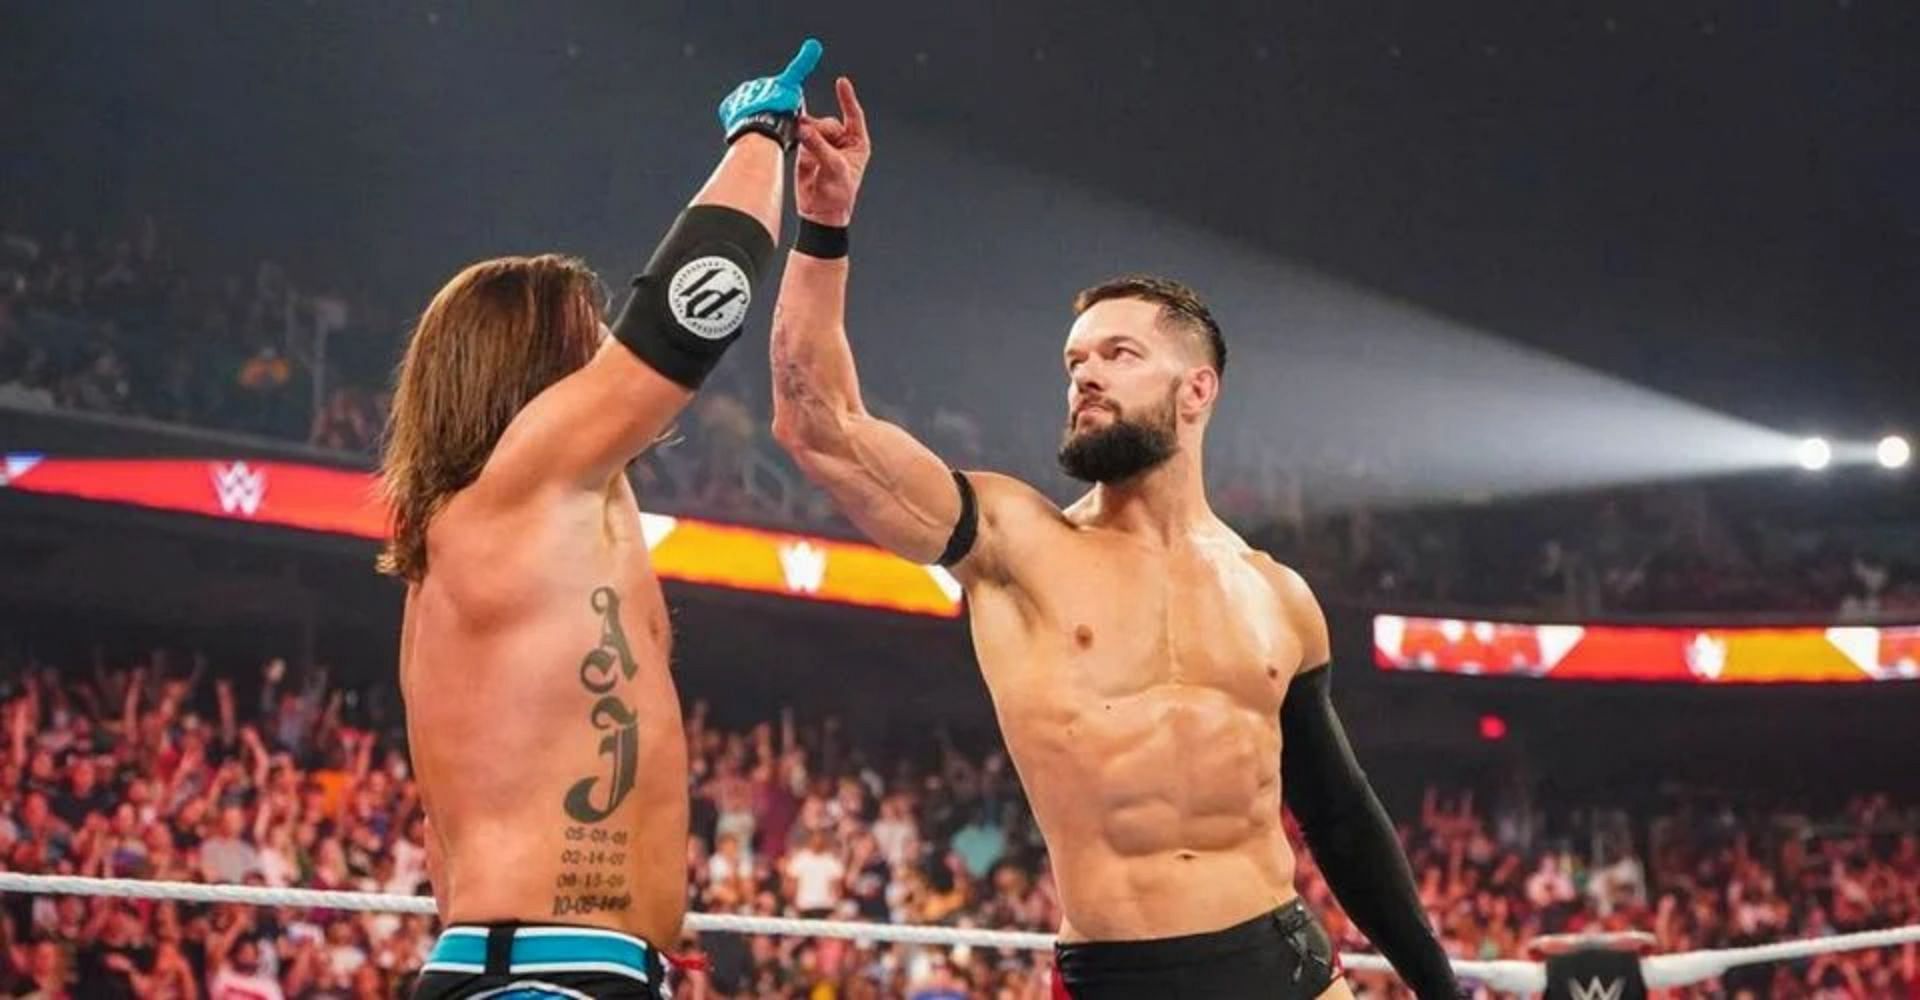 Styles and Balor are two of the most experienced stars in WWE today.